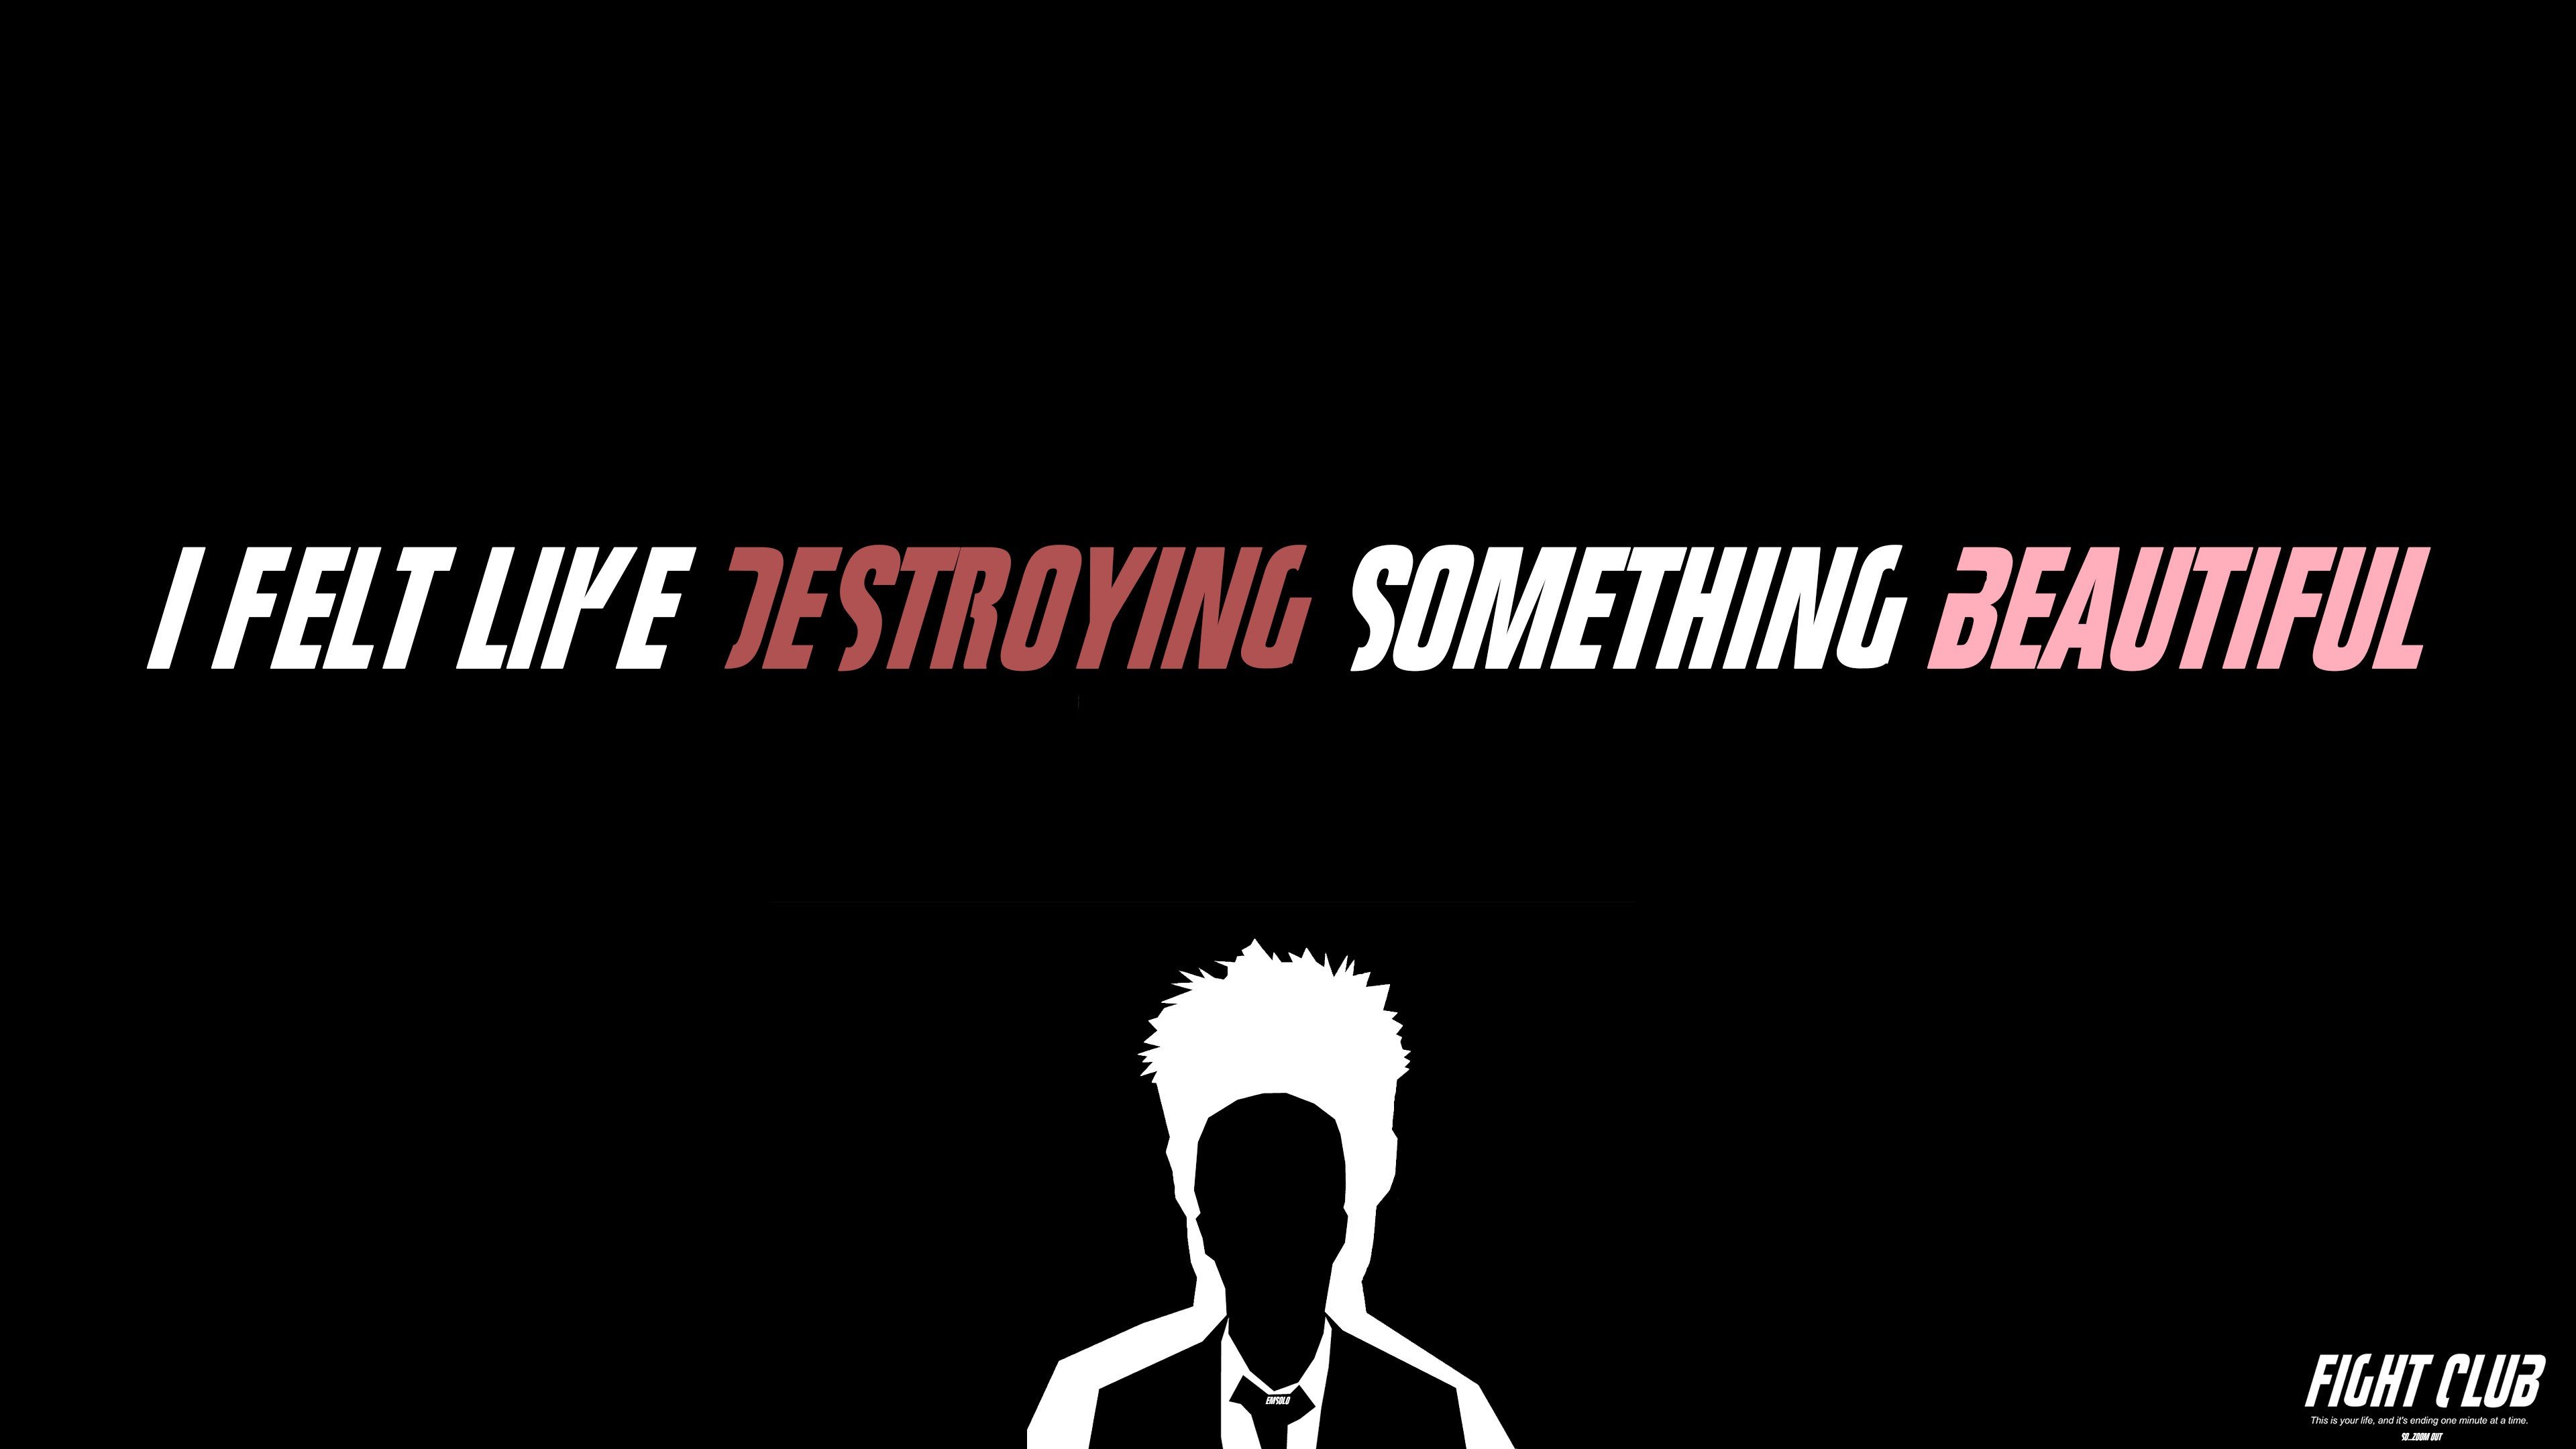 Fight Club, movies, quote, black, typography, minimalism, black background, simple backgroundx2160 Wallpaper